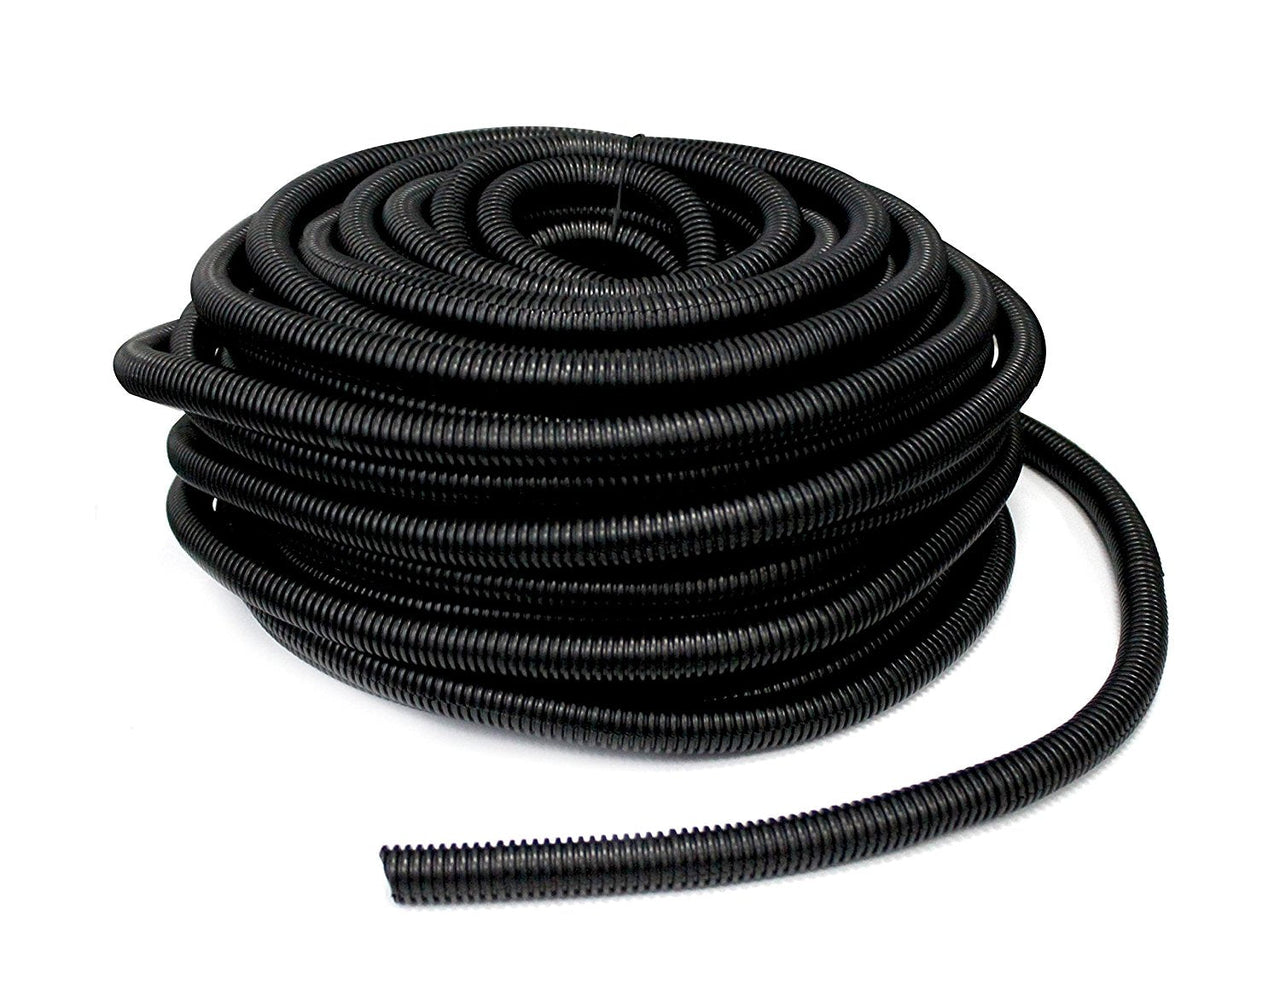 Patron SLT14-20 20’ <br/>20 feet cord protector split wire loom cable sleeve, management and organizer, protectors for television, audio, car, marine, computer cables, secure wires from rabbits, cats, and other pets